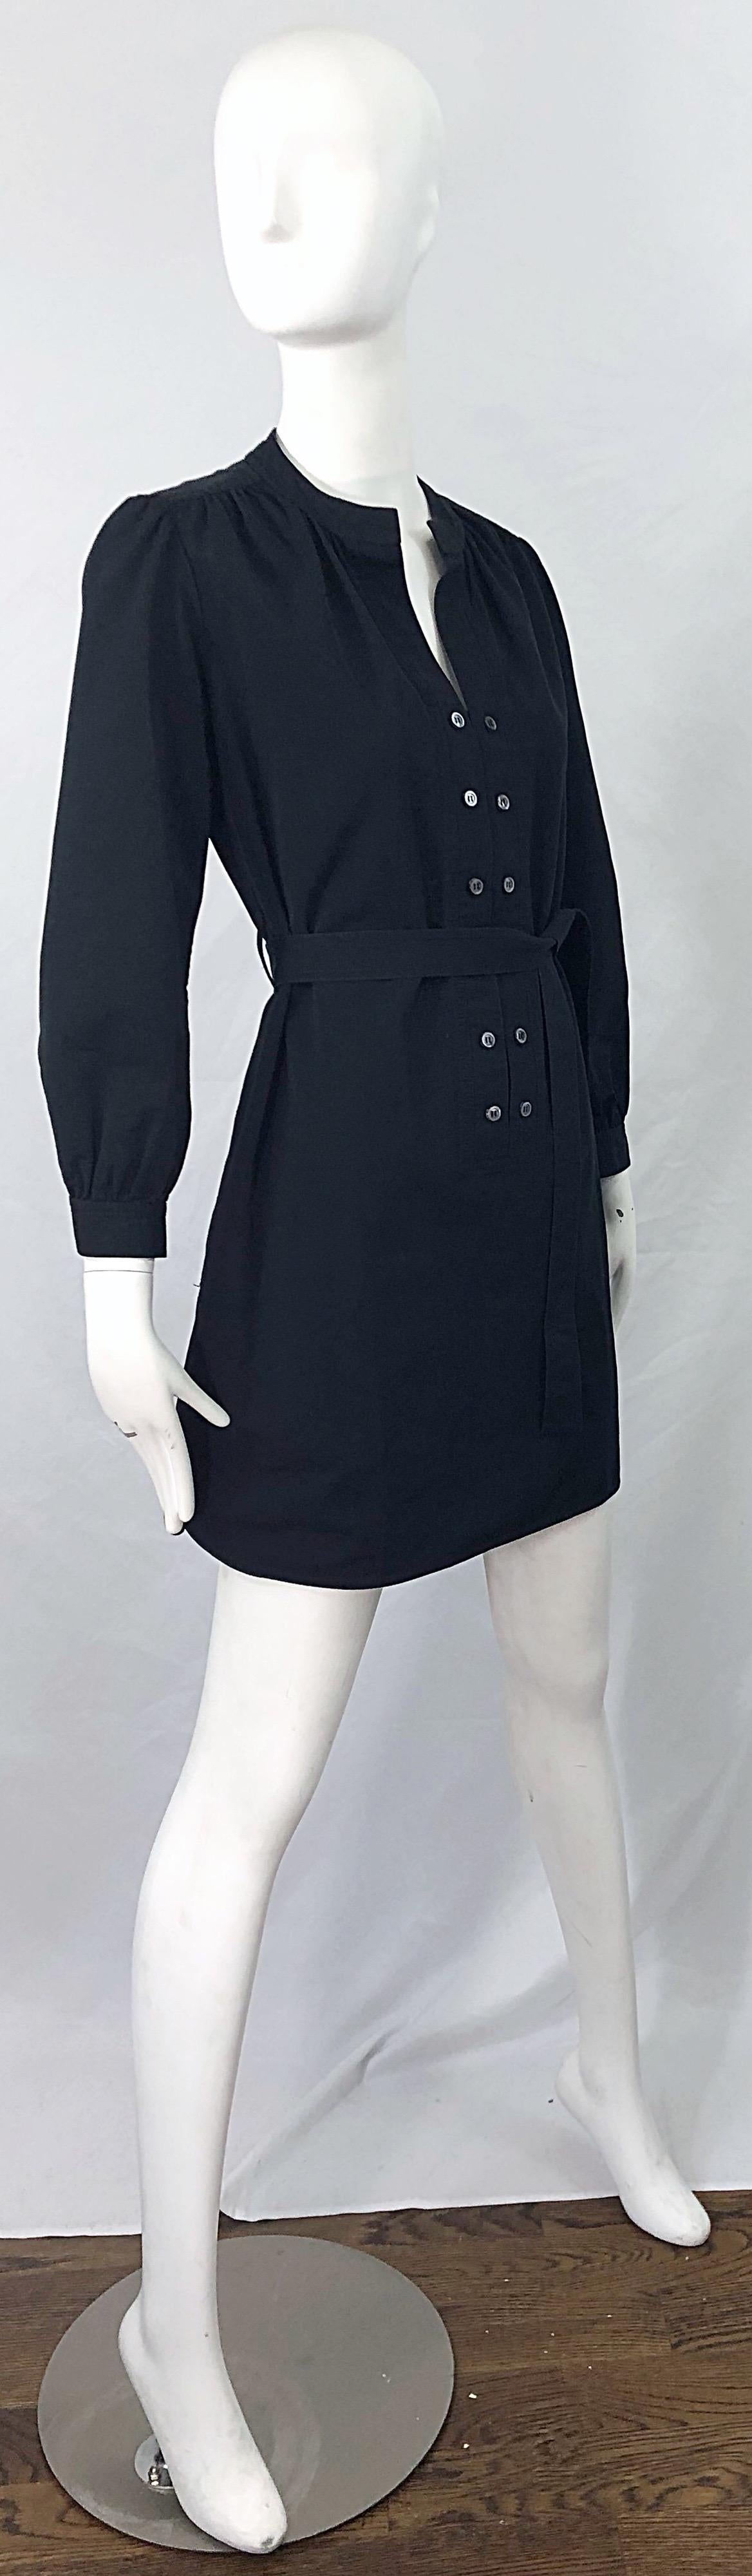 Derek Lam Early 2000s Size 6 / 8 Black Silk Rayon Belted Shirt Dress For Sale 4